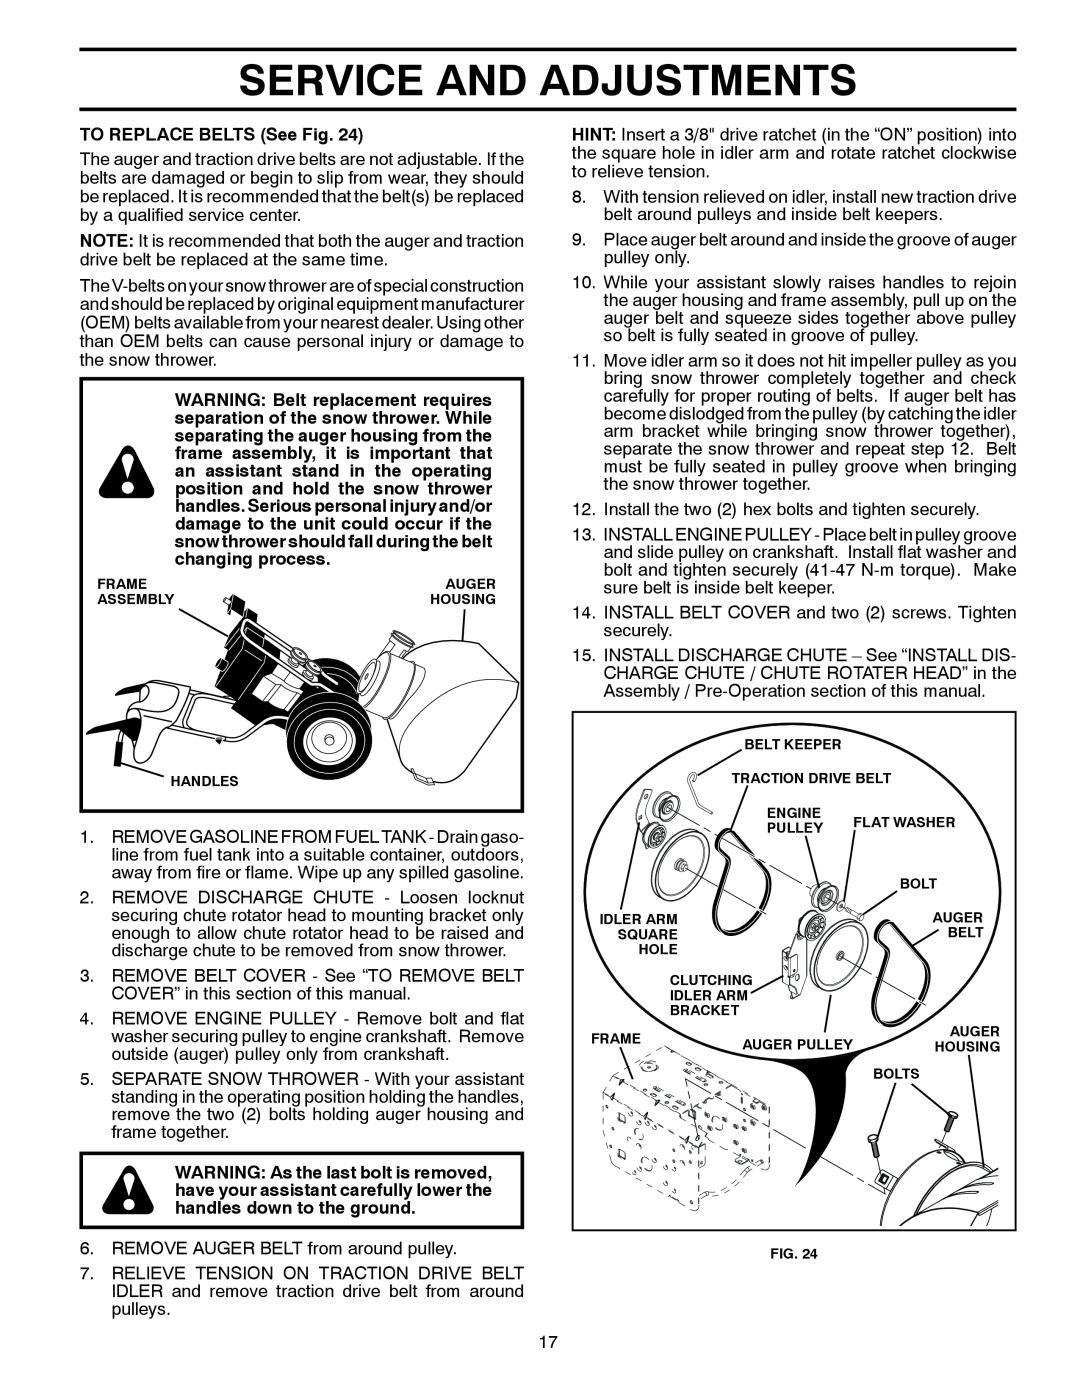 Husqvarna 16530-LS manual Service And Adjustments, TO REPLACE BELTS See Fig 